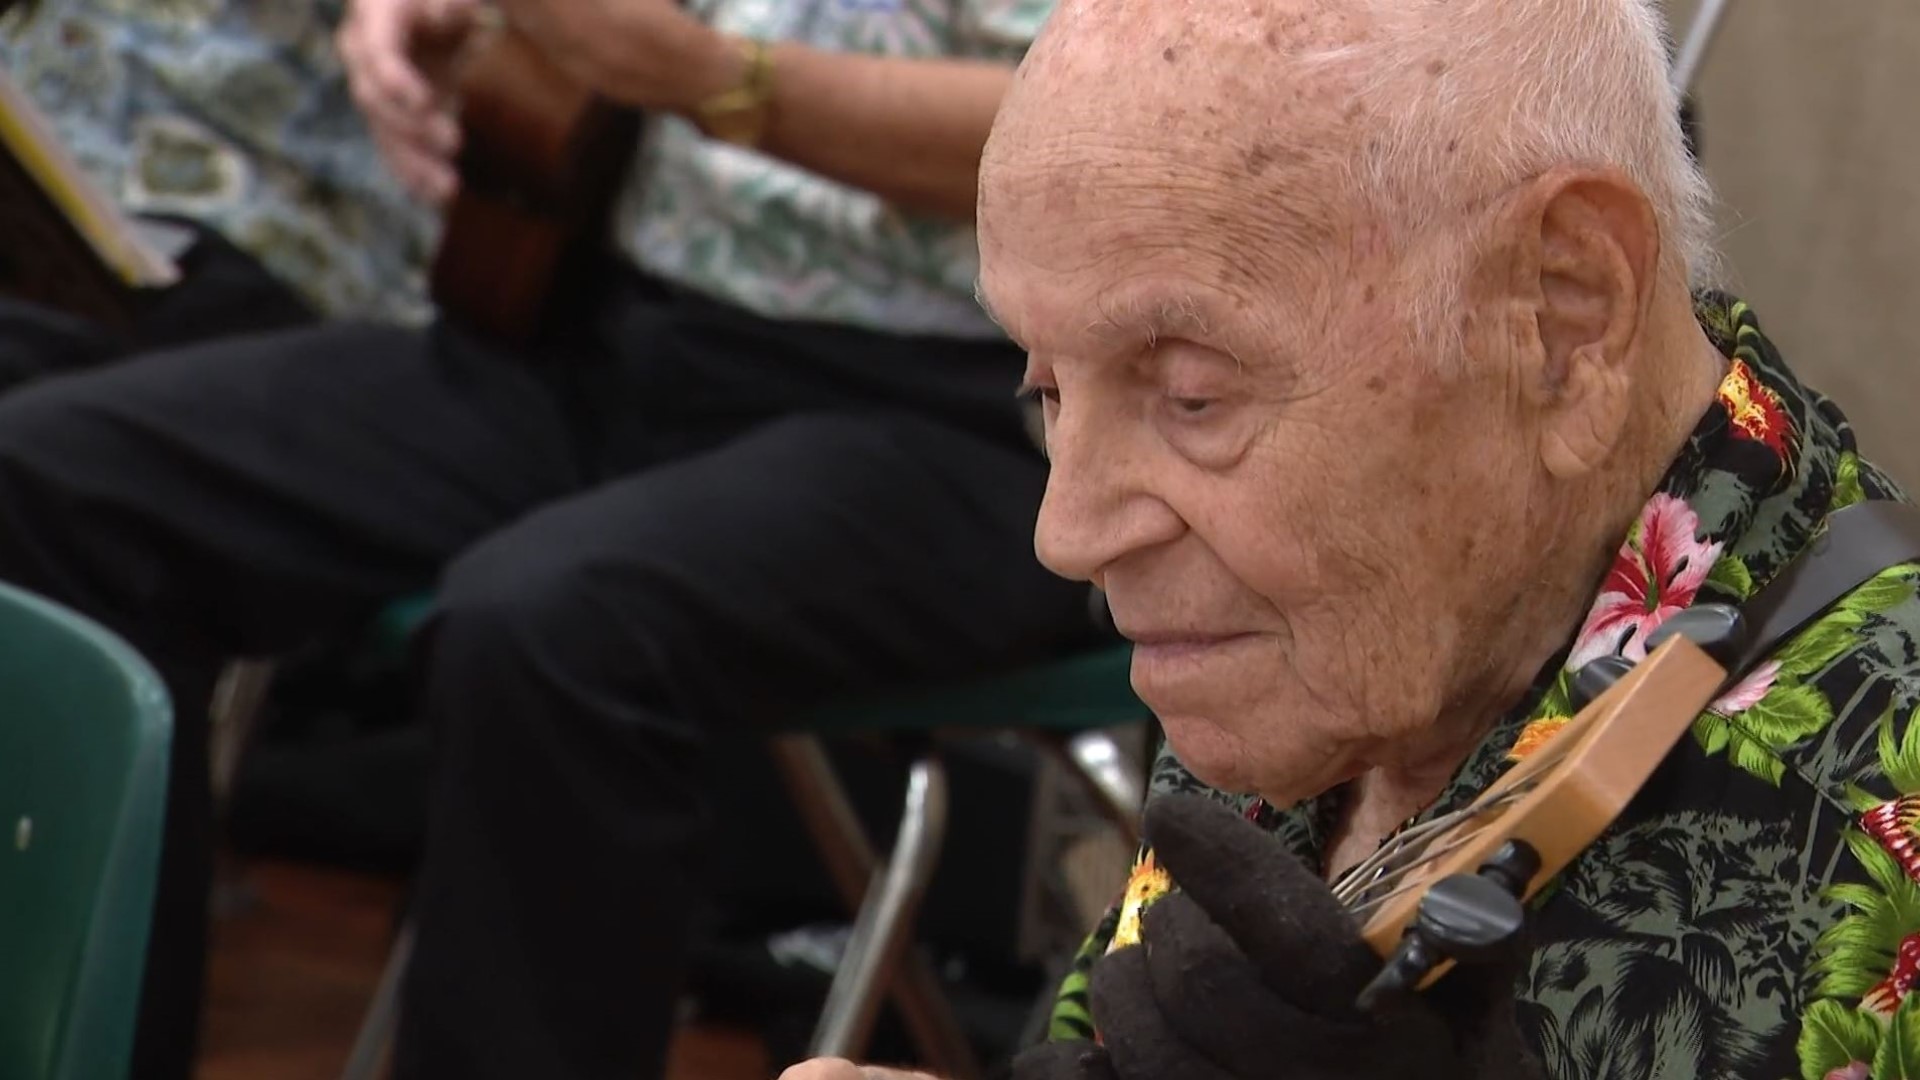 Ted Piskos, a WWII Veteran, hasn't lost his rhythm at 100 years old. Piskos has long been a musician, starting with violin and now playing the Ukelele.